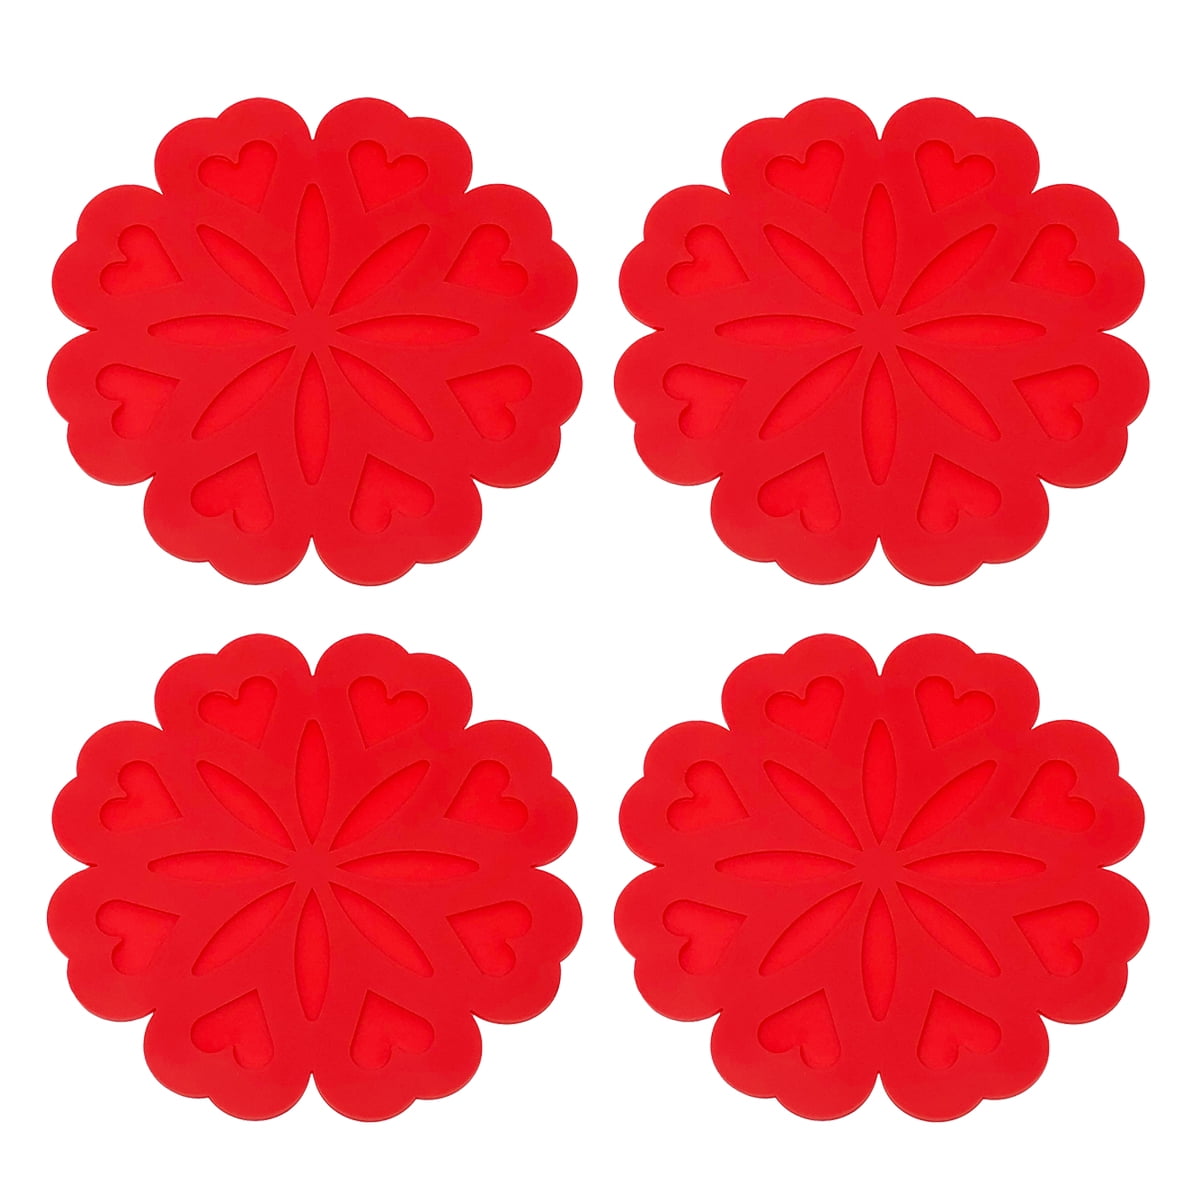 Wrapables Silicone Pot Holders, Multi-Use Durable Flexible Non-Slip Insulated Silicone Trivet (Set of 4) Red